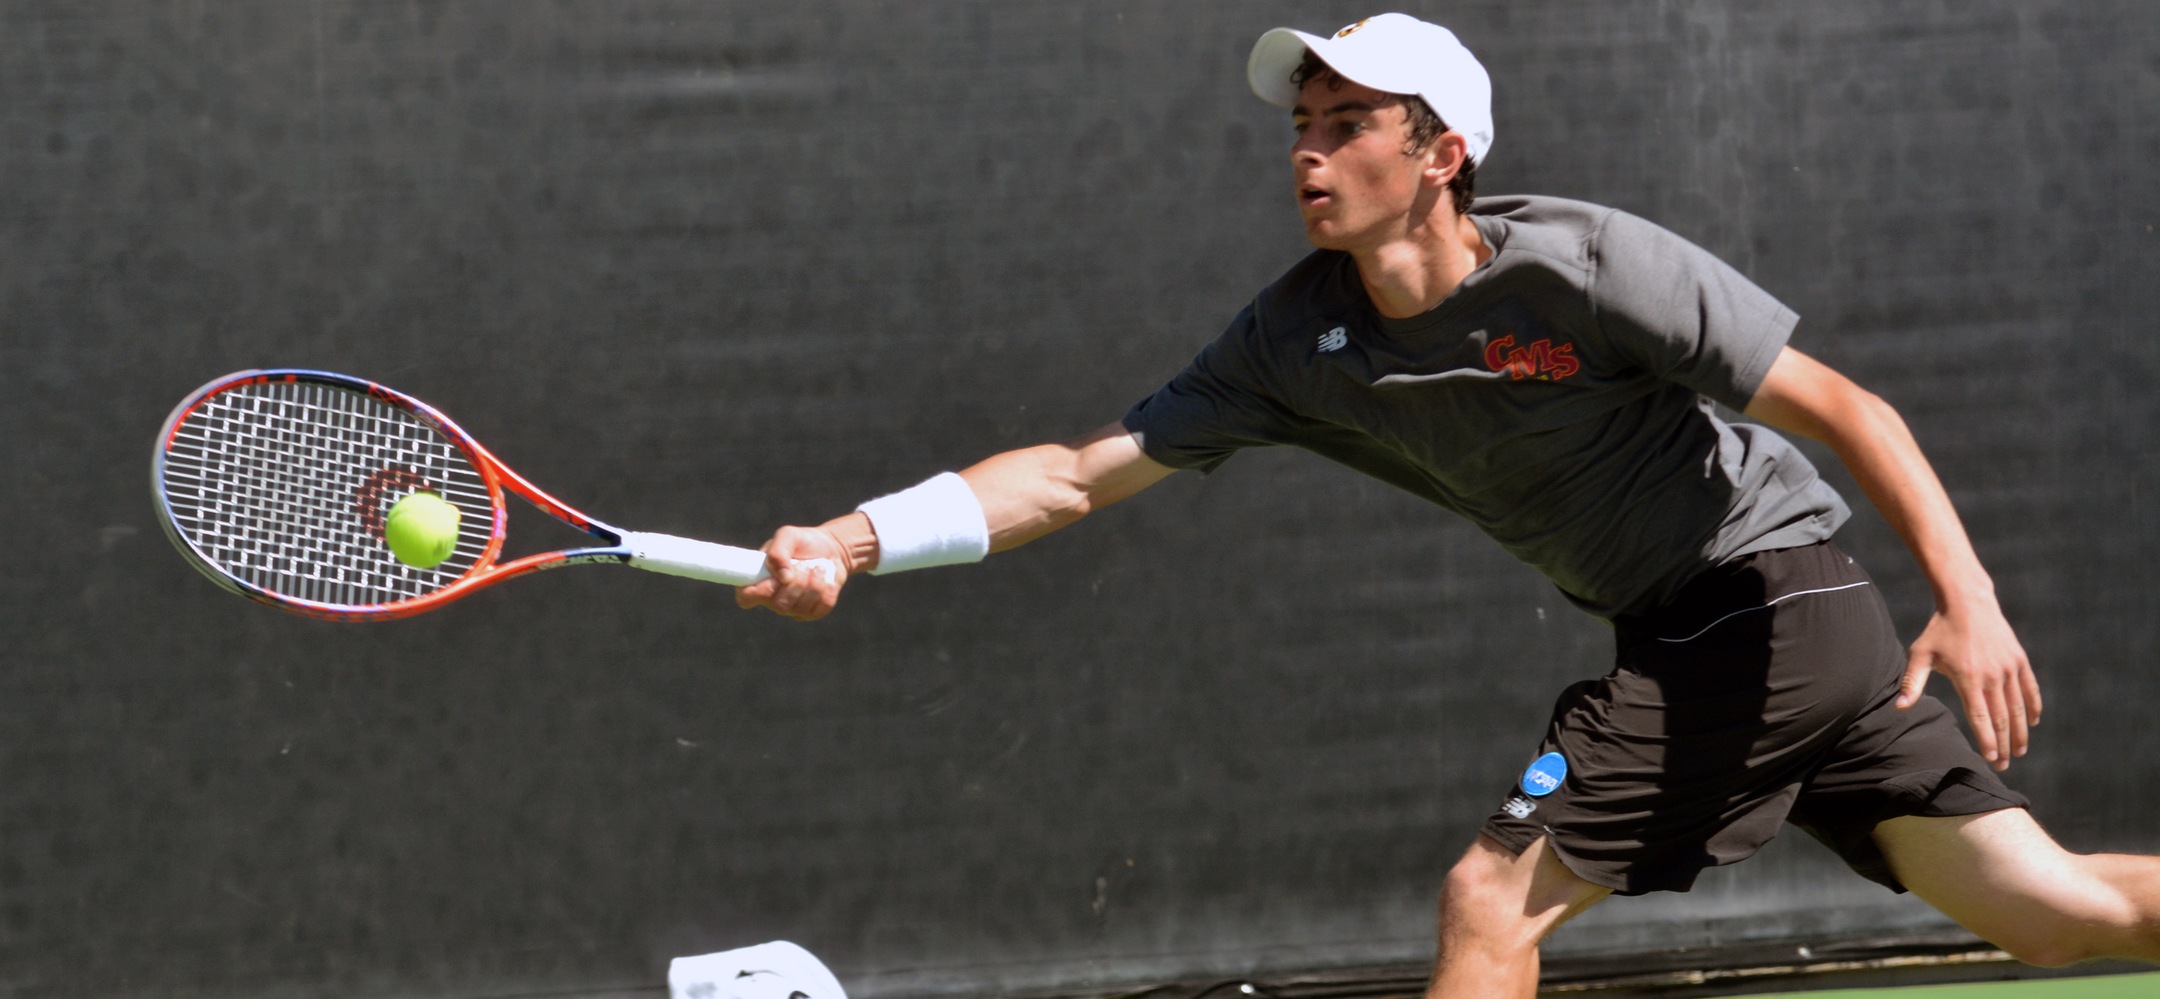 Jack Katzman won at No. 1 singles and No. 2 doubles, leading CMS to a 9-0 shutout of No. 25 Caltech on Friday